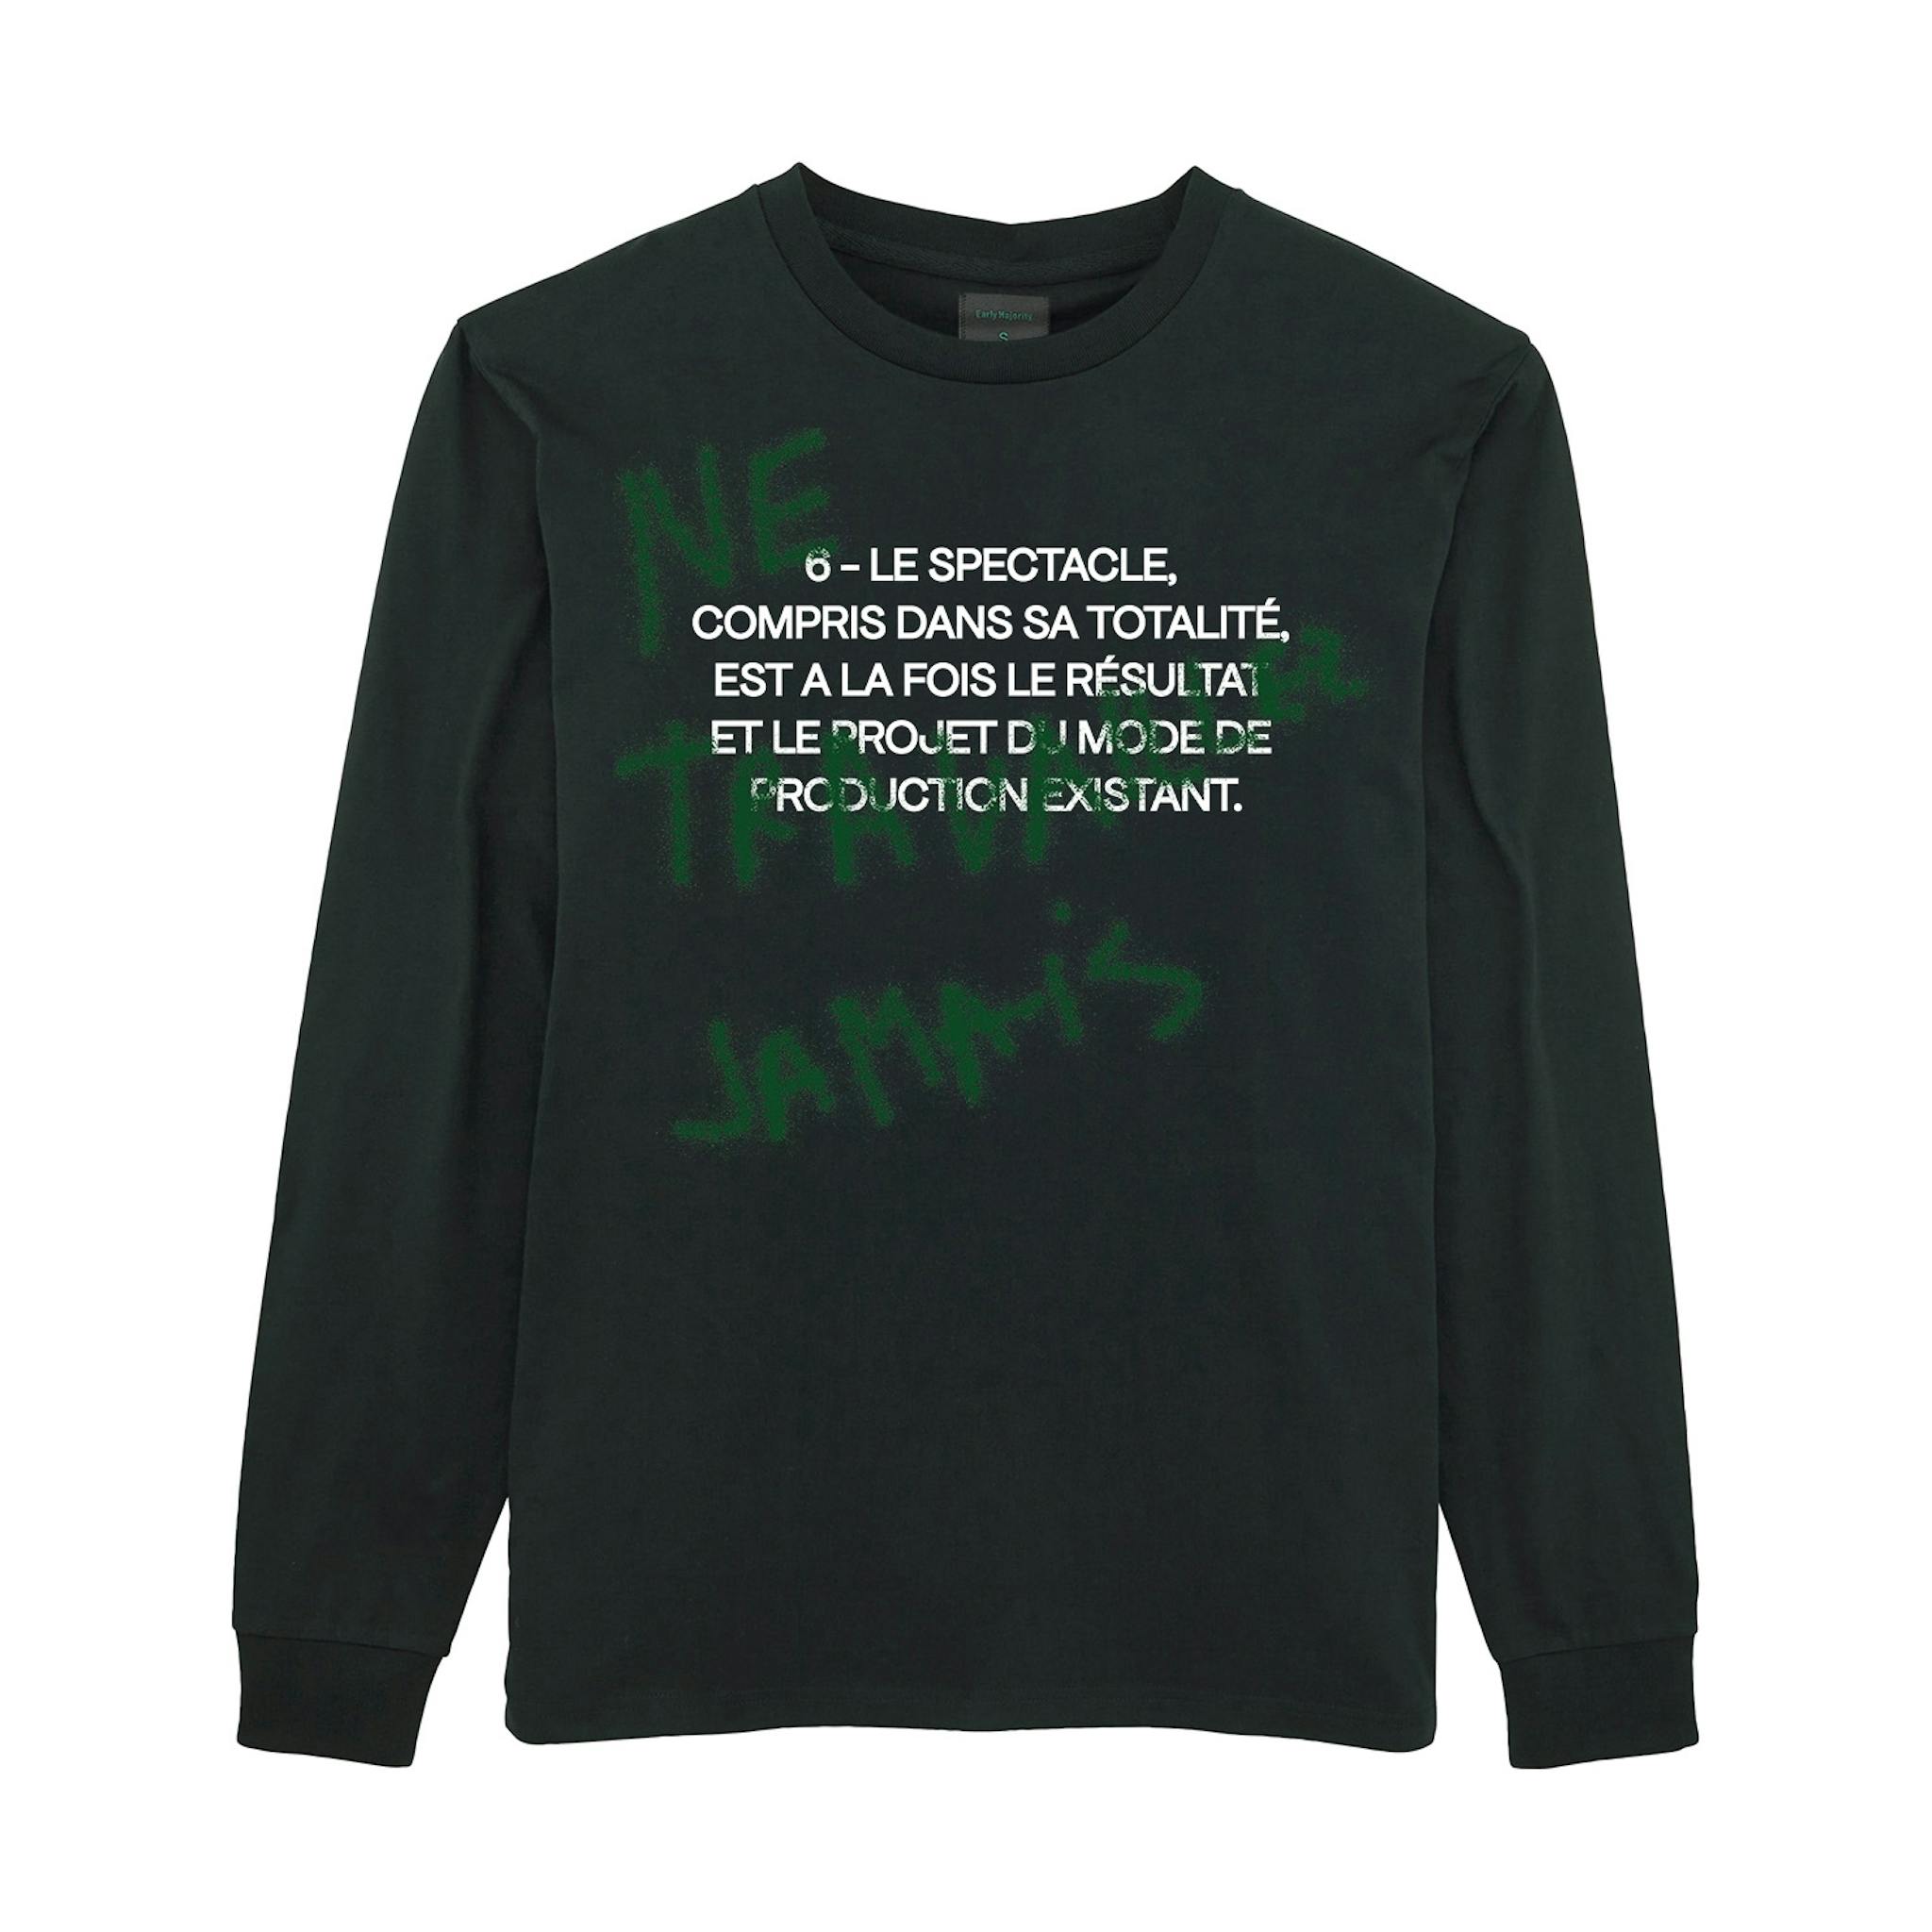 A black long-sleeve T-shirt with green text in a graffiti style writing over white block text.